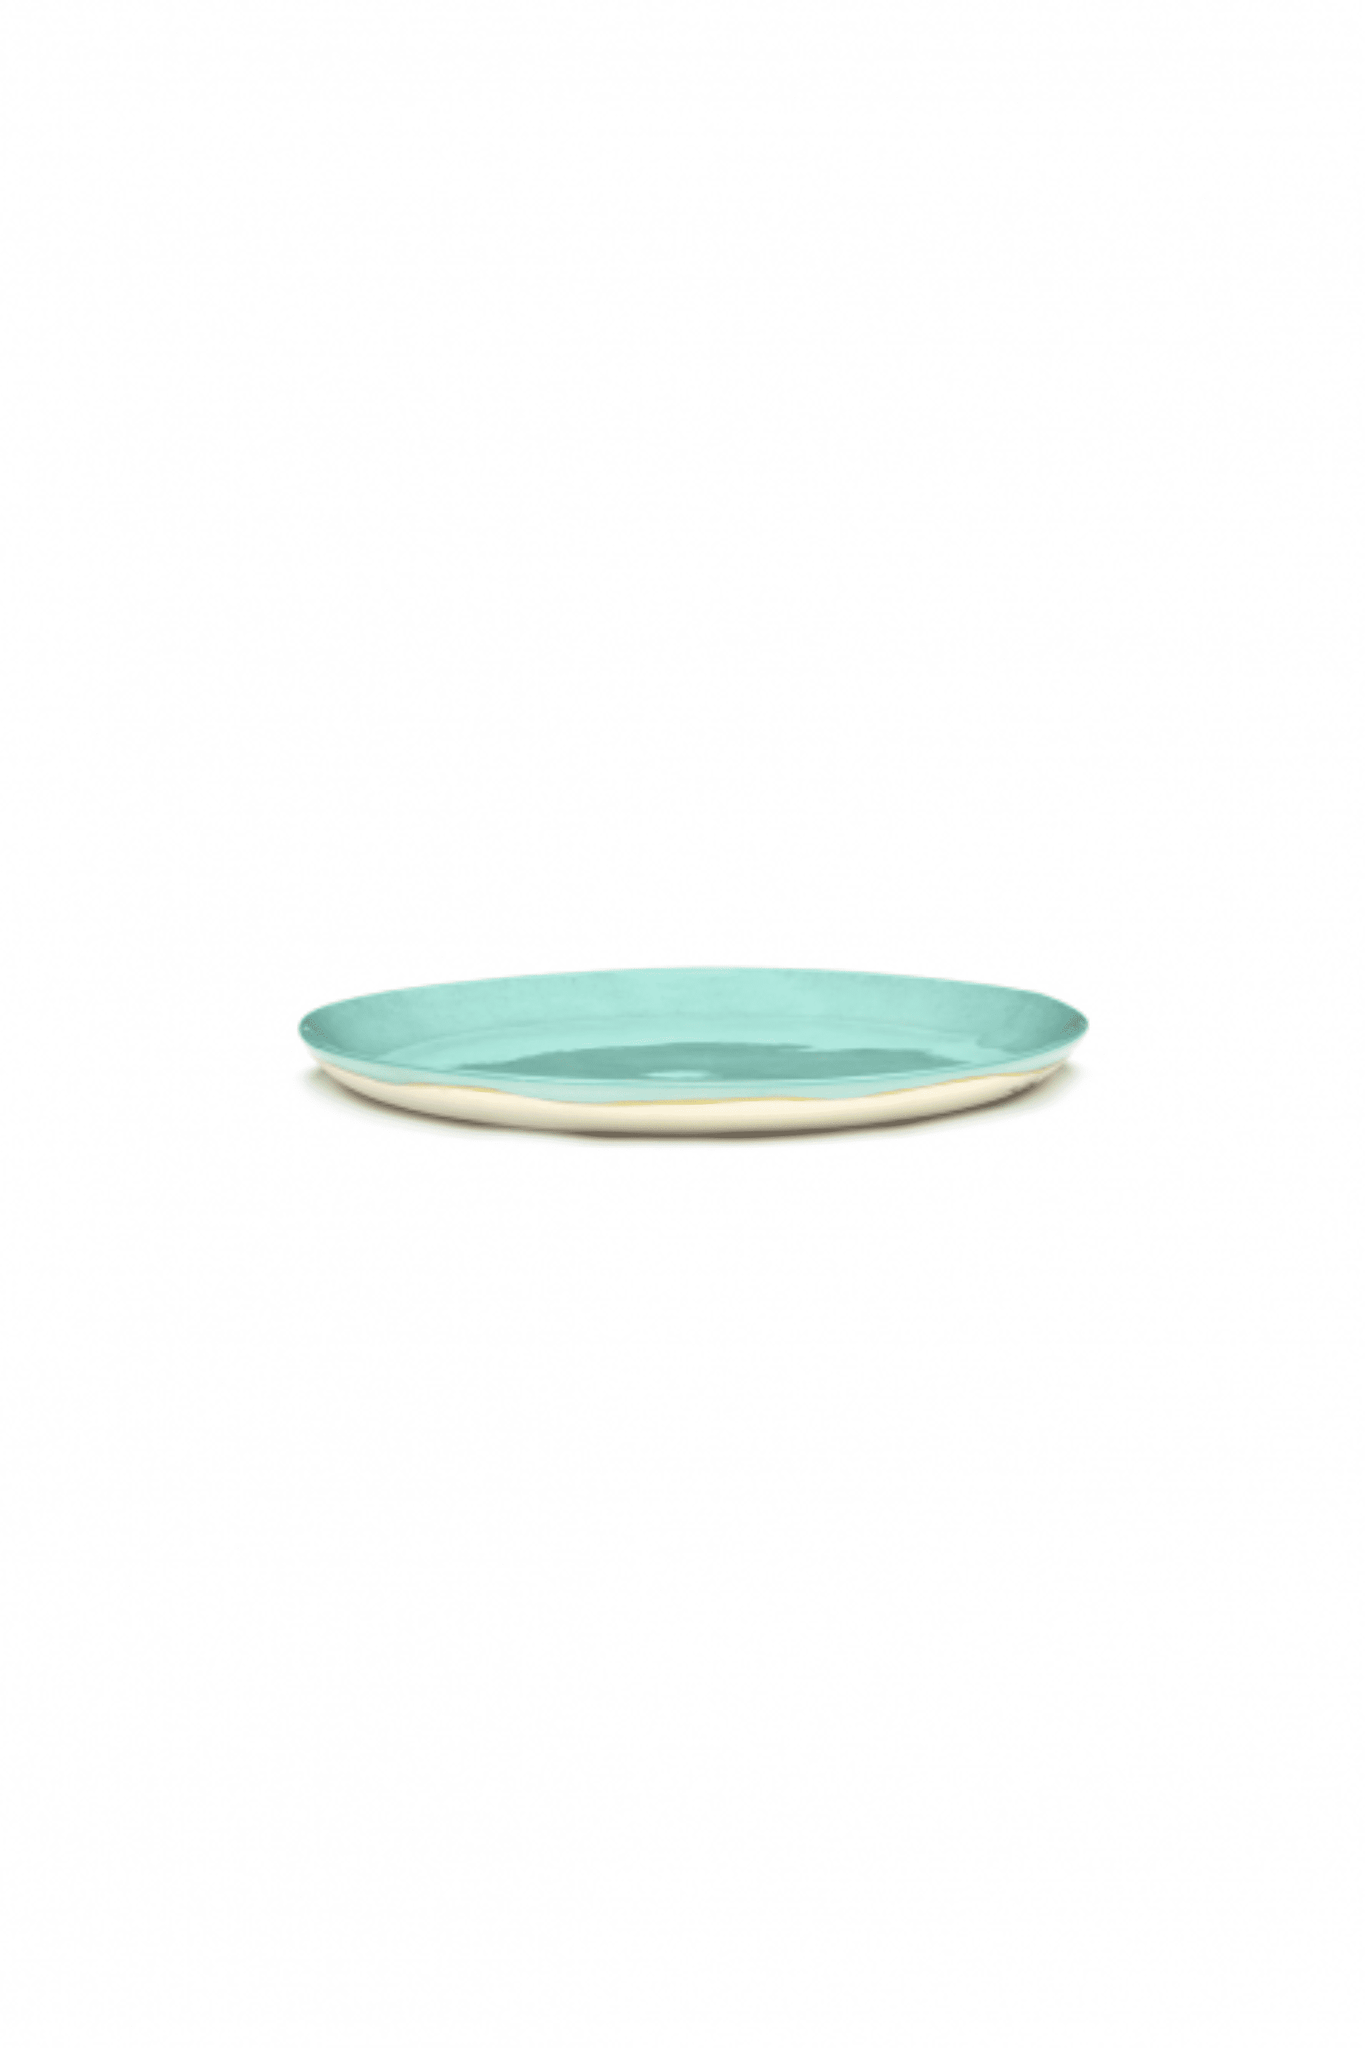 Set of 2 Large Plates, Azure Ottolenghi Serax, front view